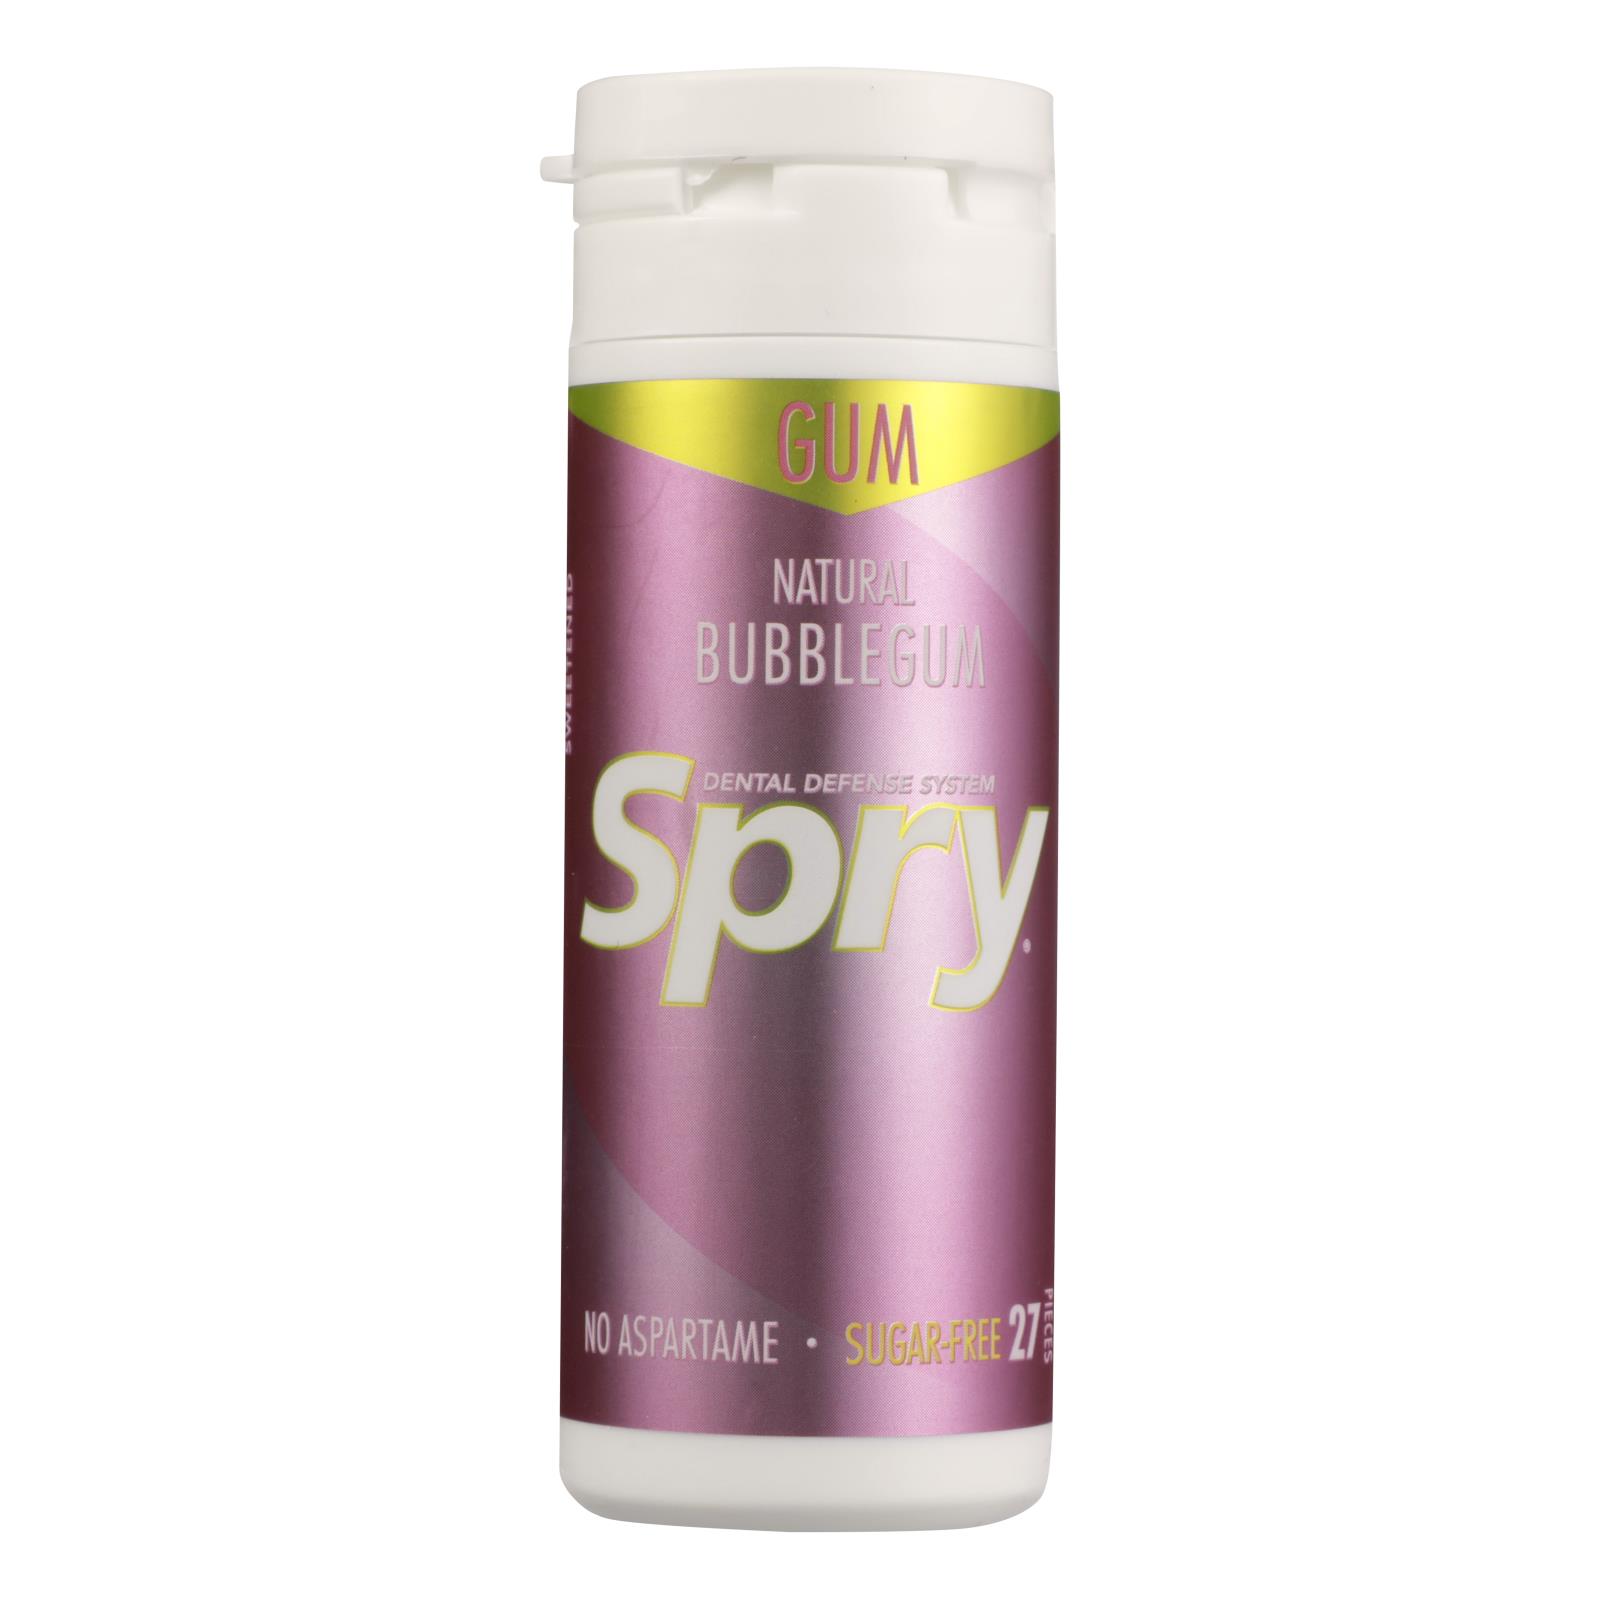 Spry - Chewing Gum Bubble - 6개 묶음상품 - 27 CT